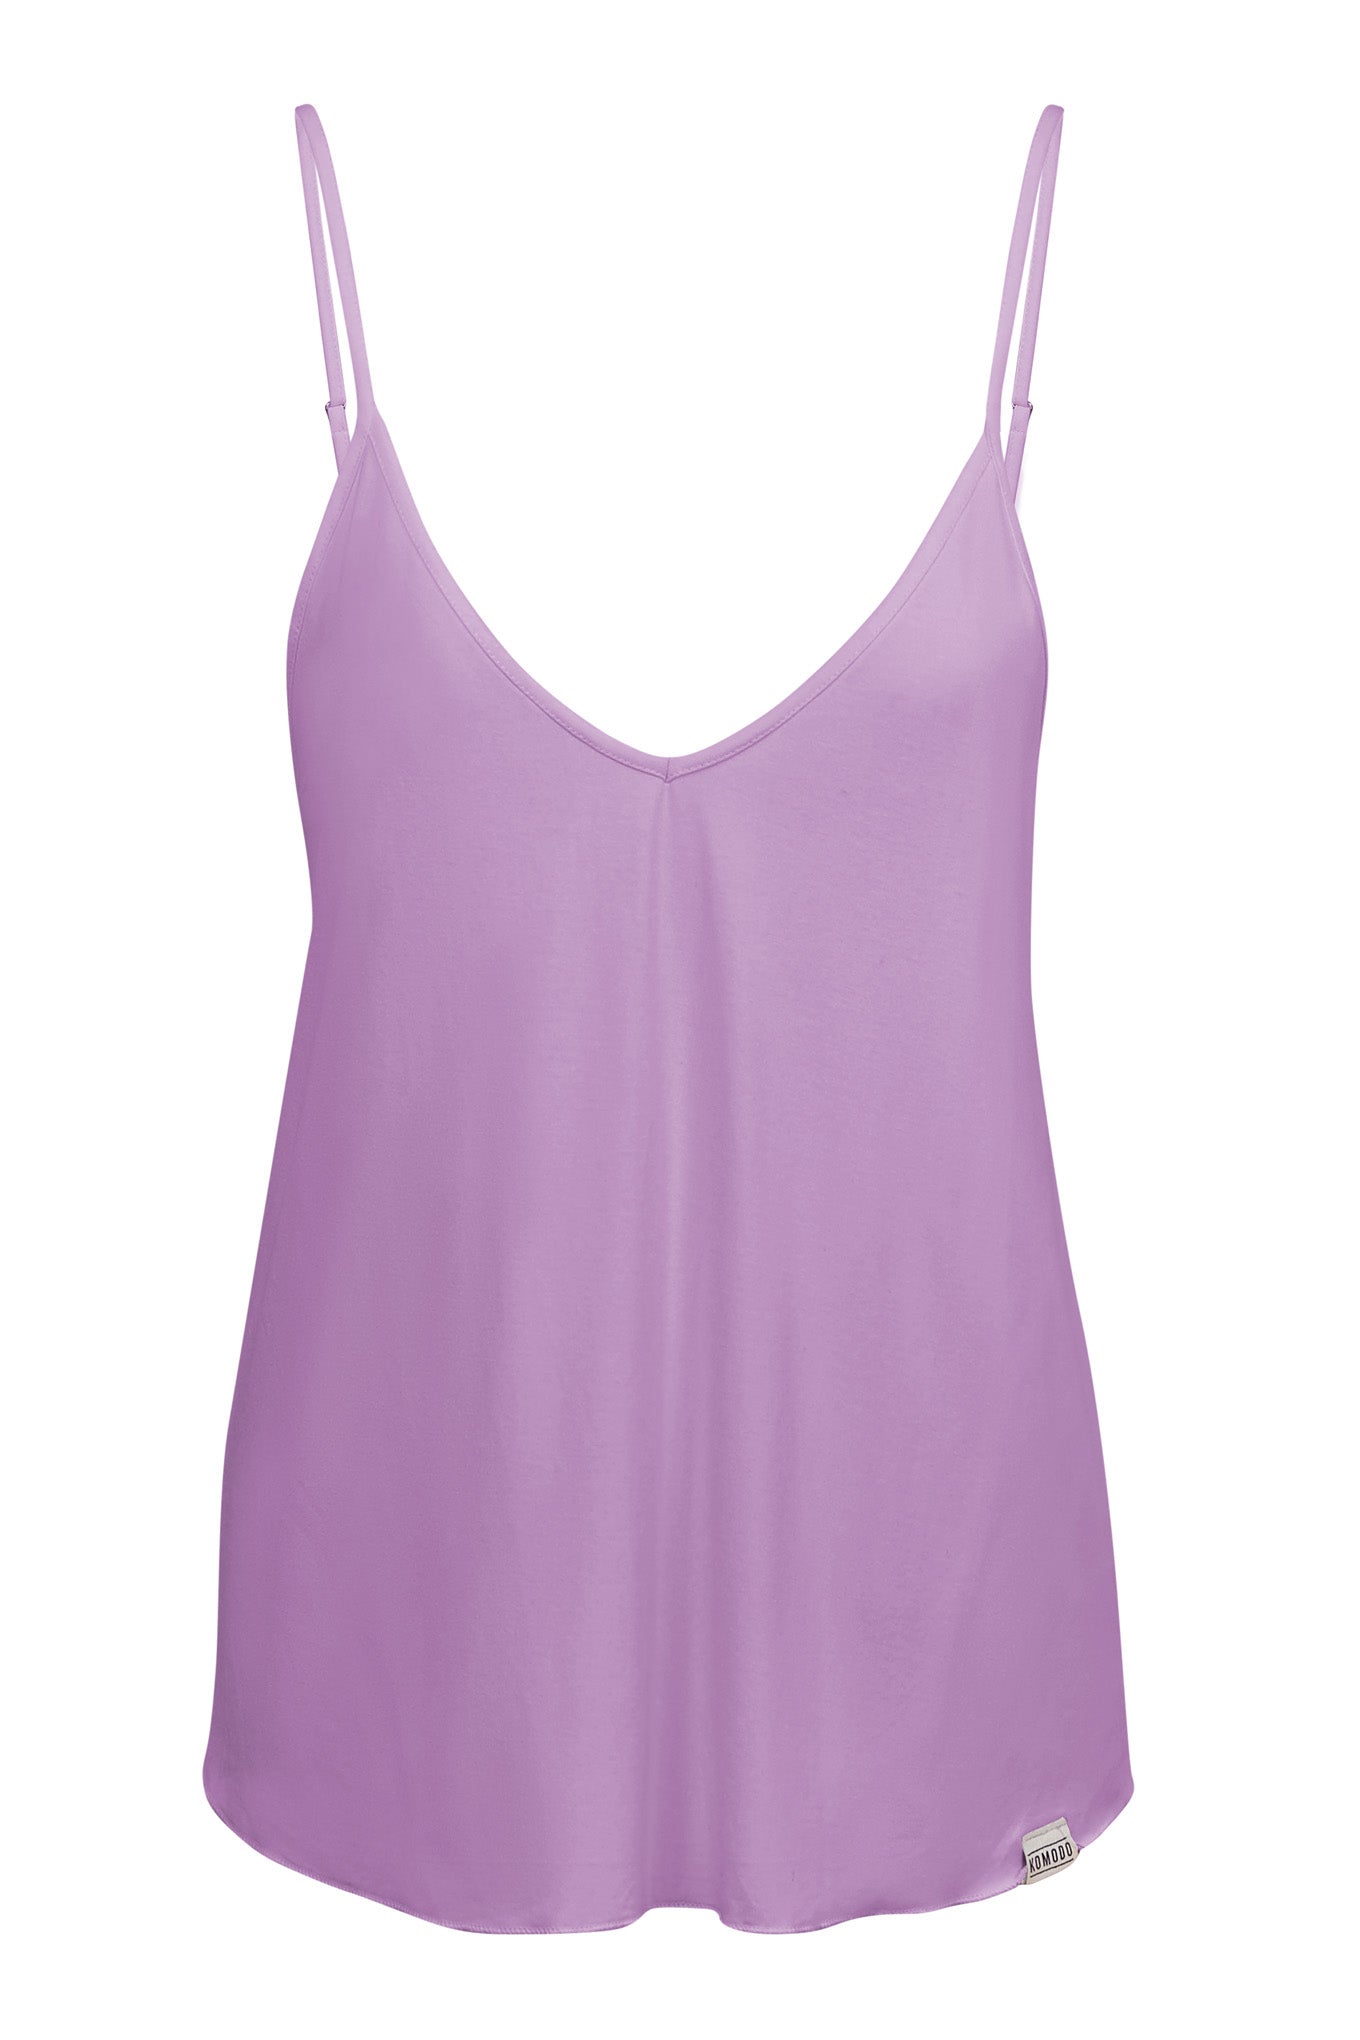 Purple top MANDY made of modal and spandex from Komodo